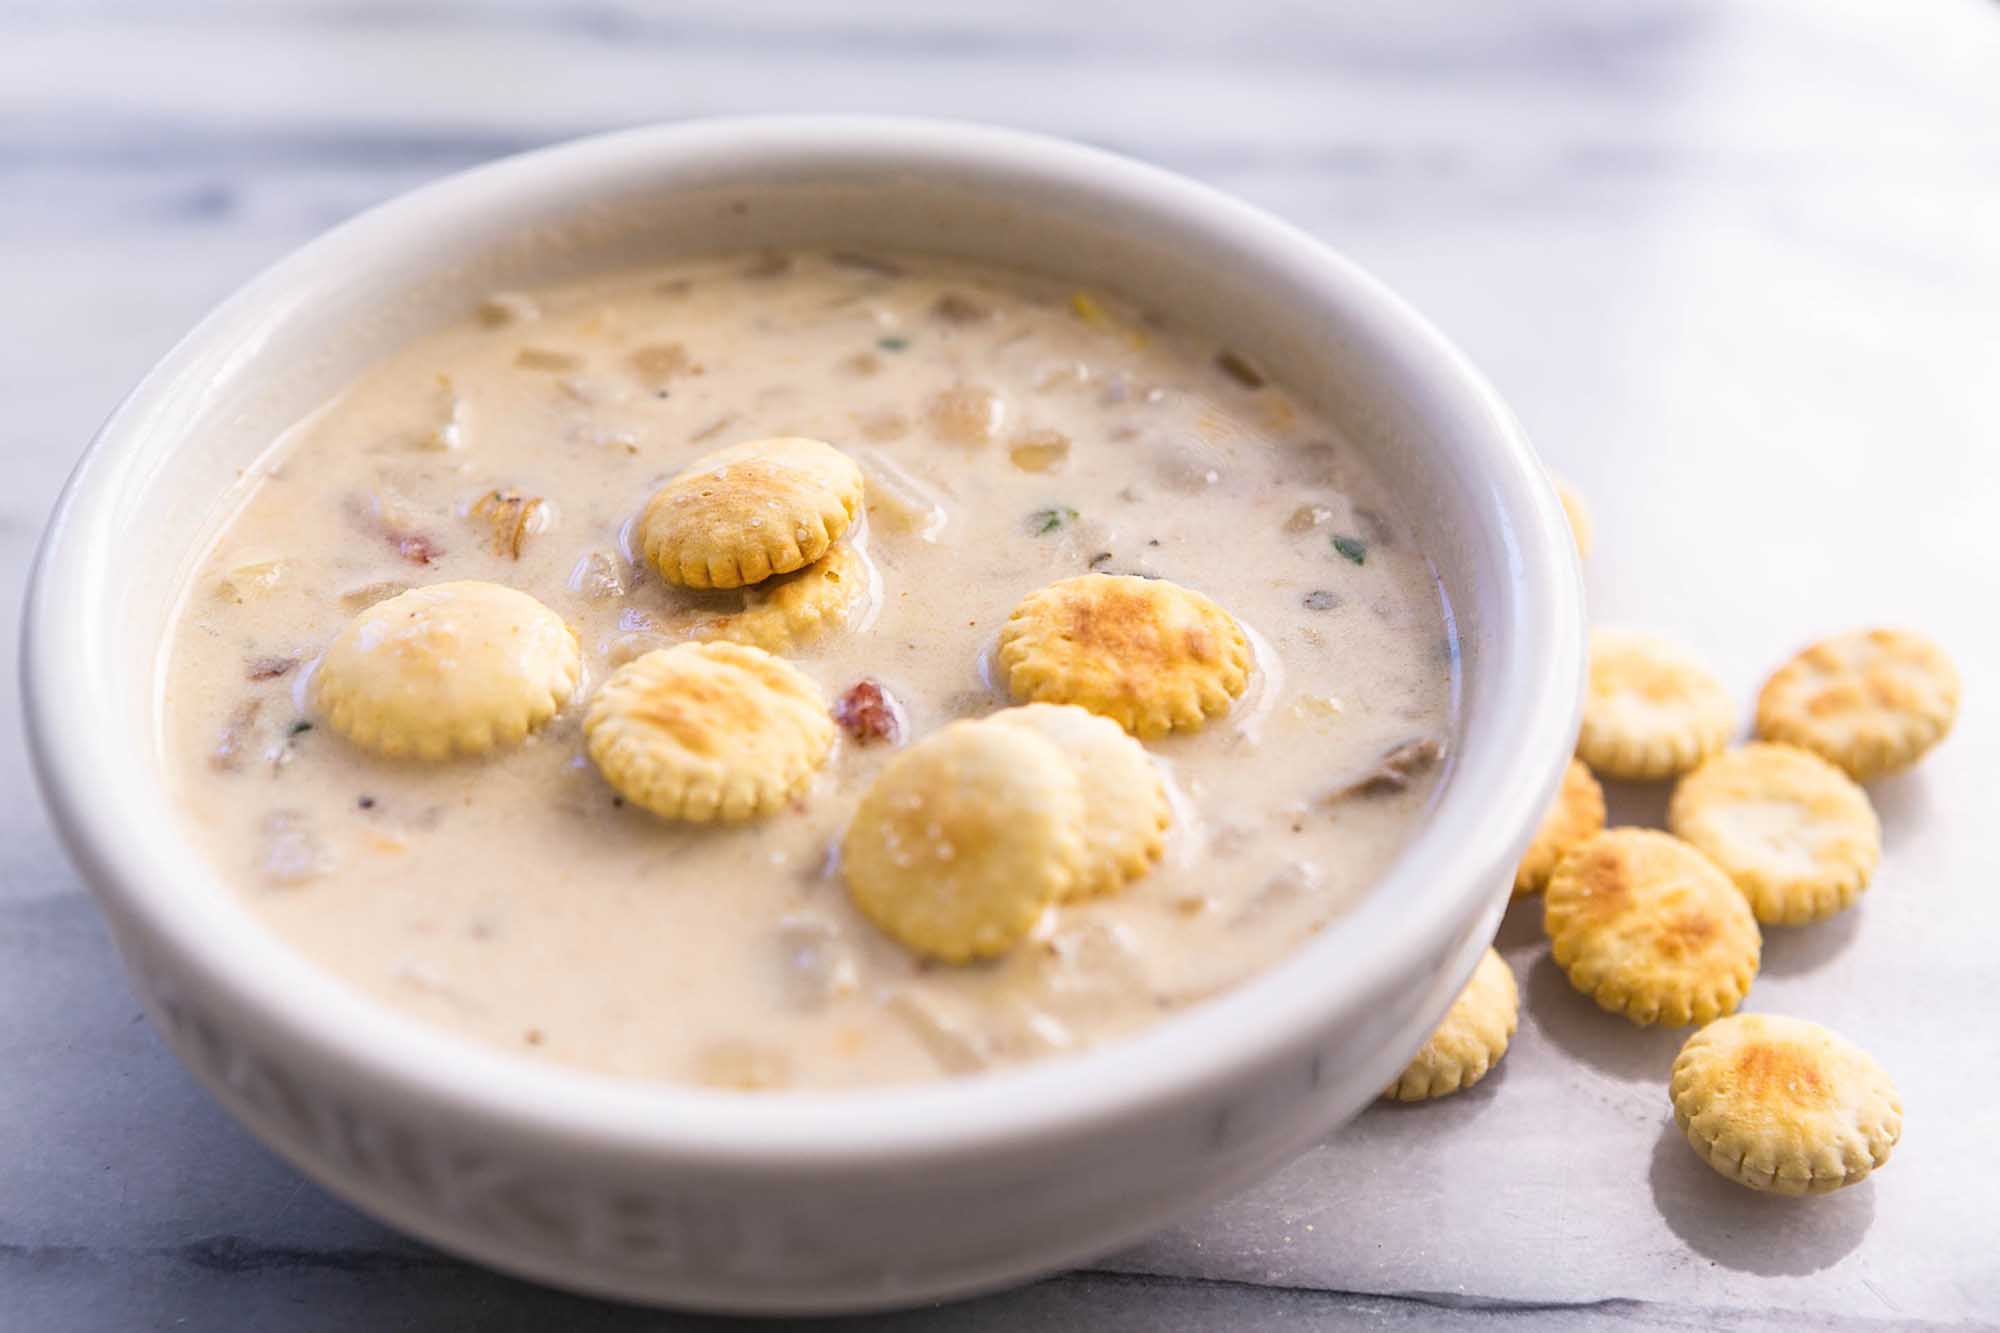 Say Yum Or Yuck to Seafood Dishes to Know How Picky You… Quiz Clam Chowder